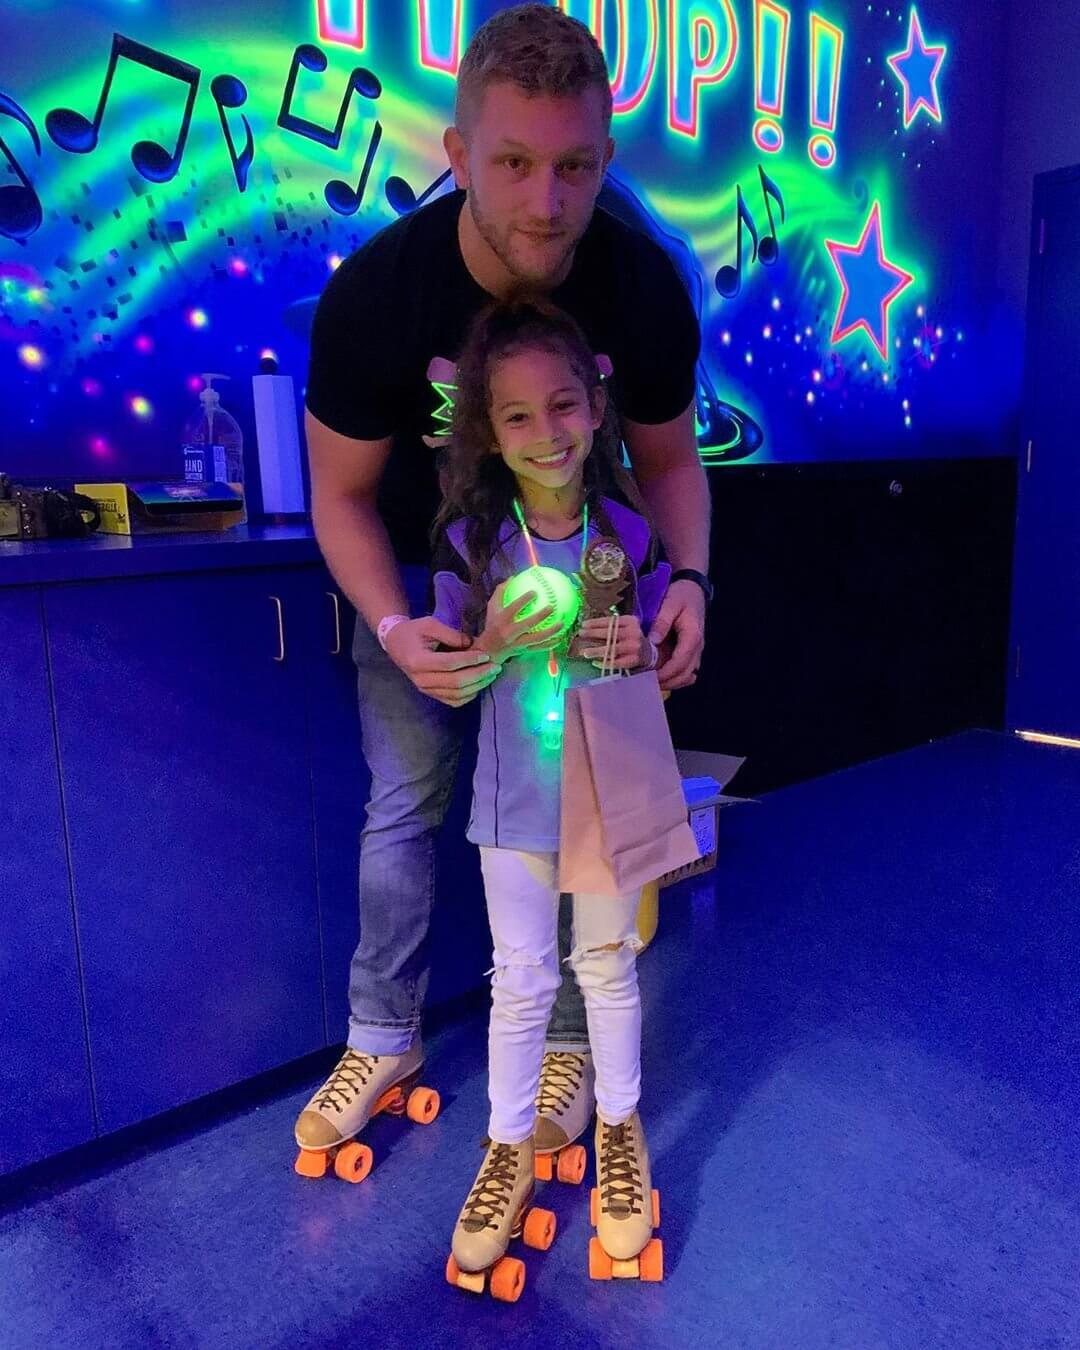 Father and Daughter at roller rink